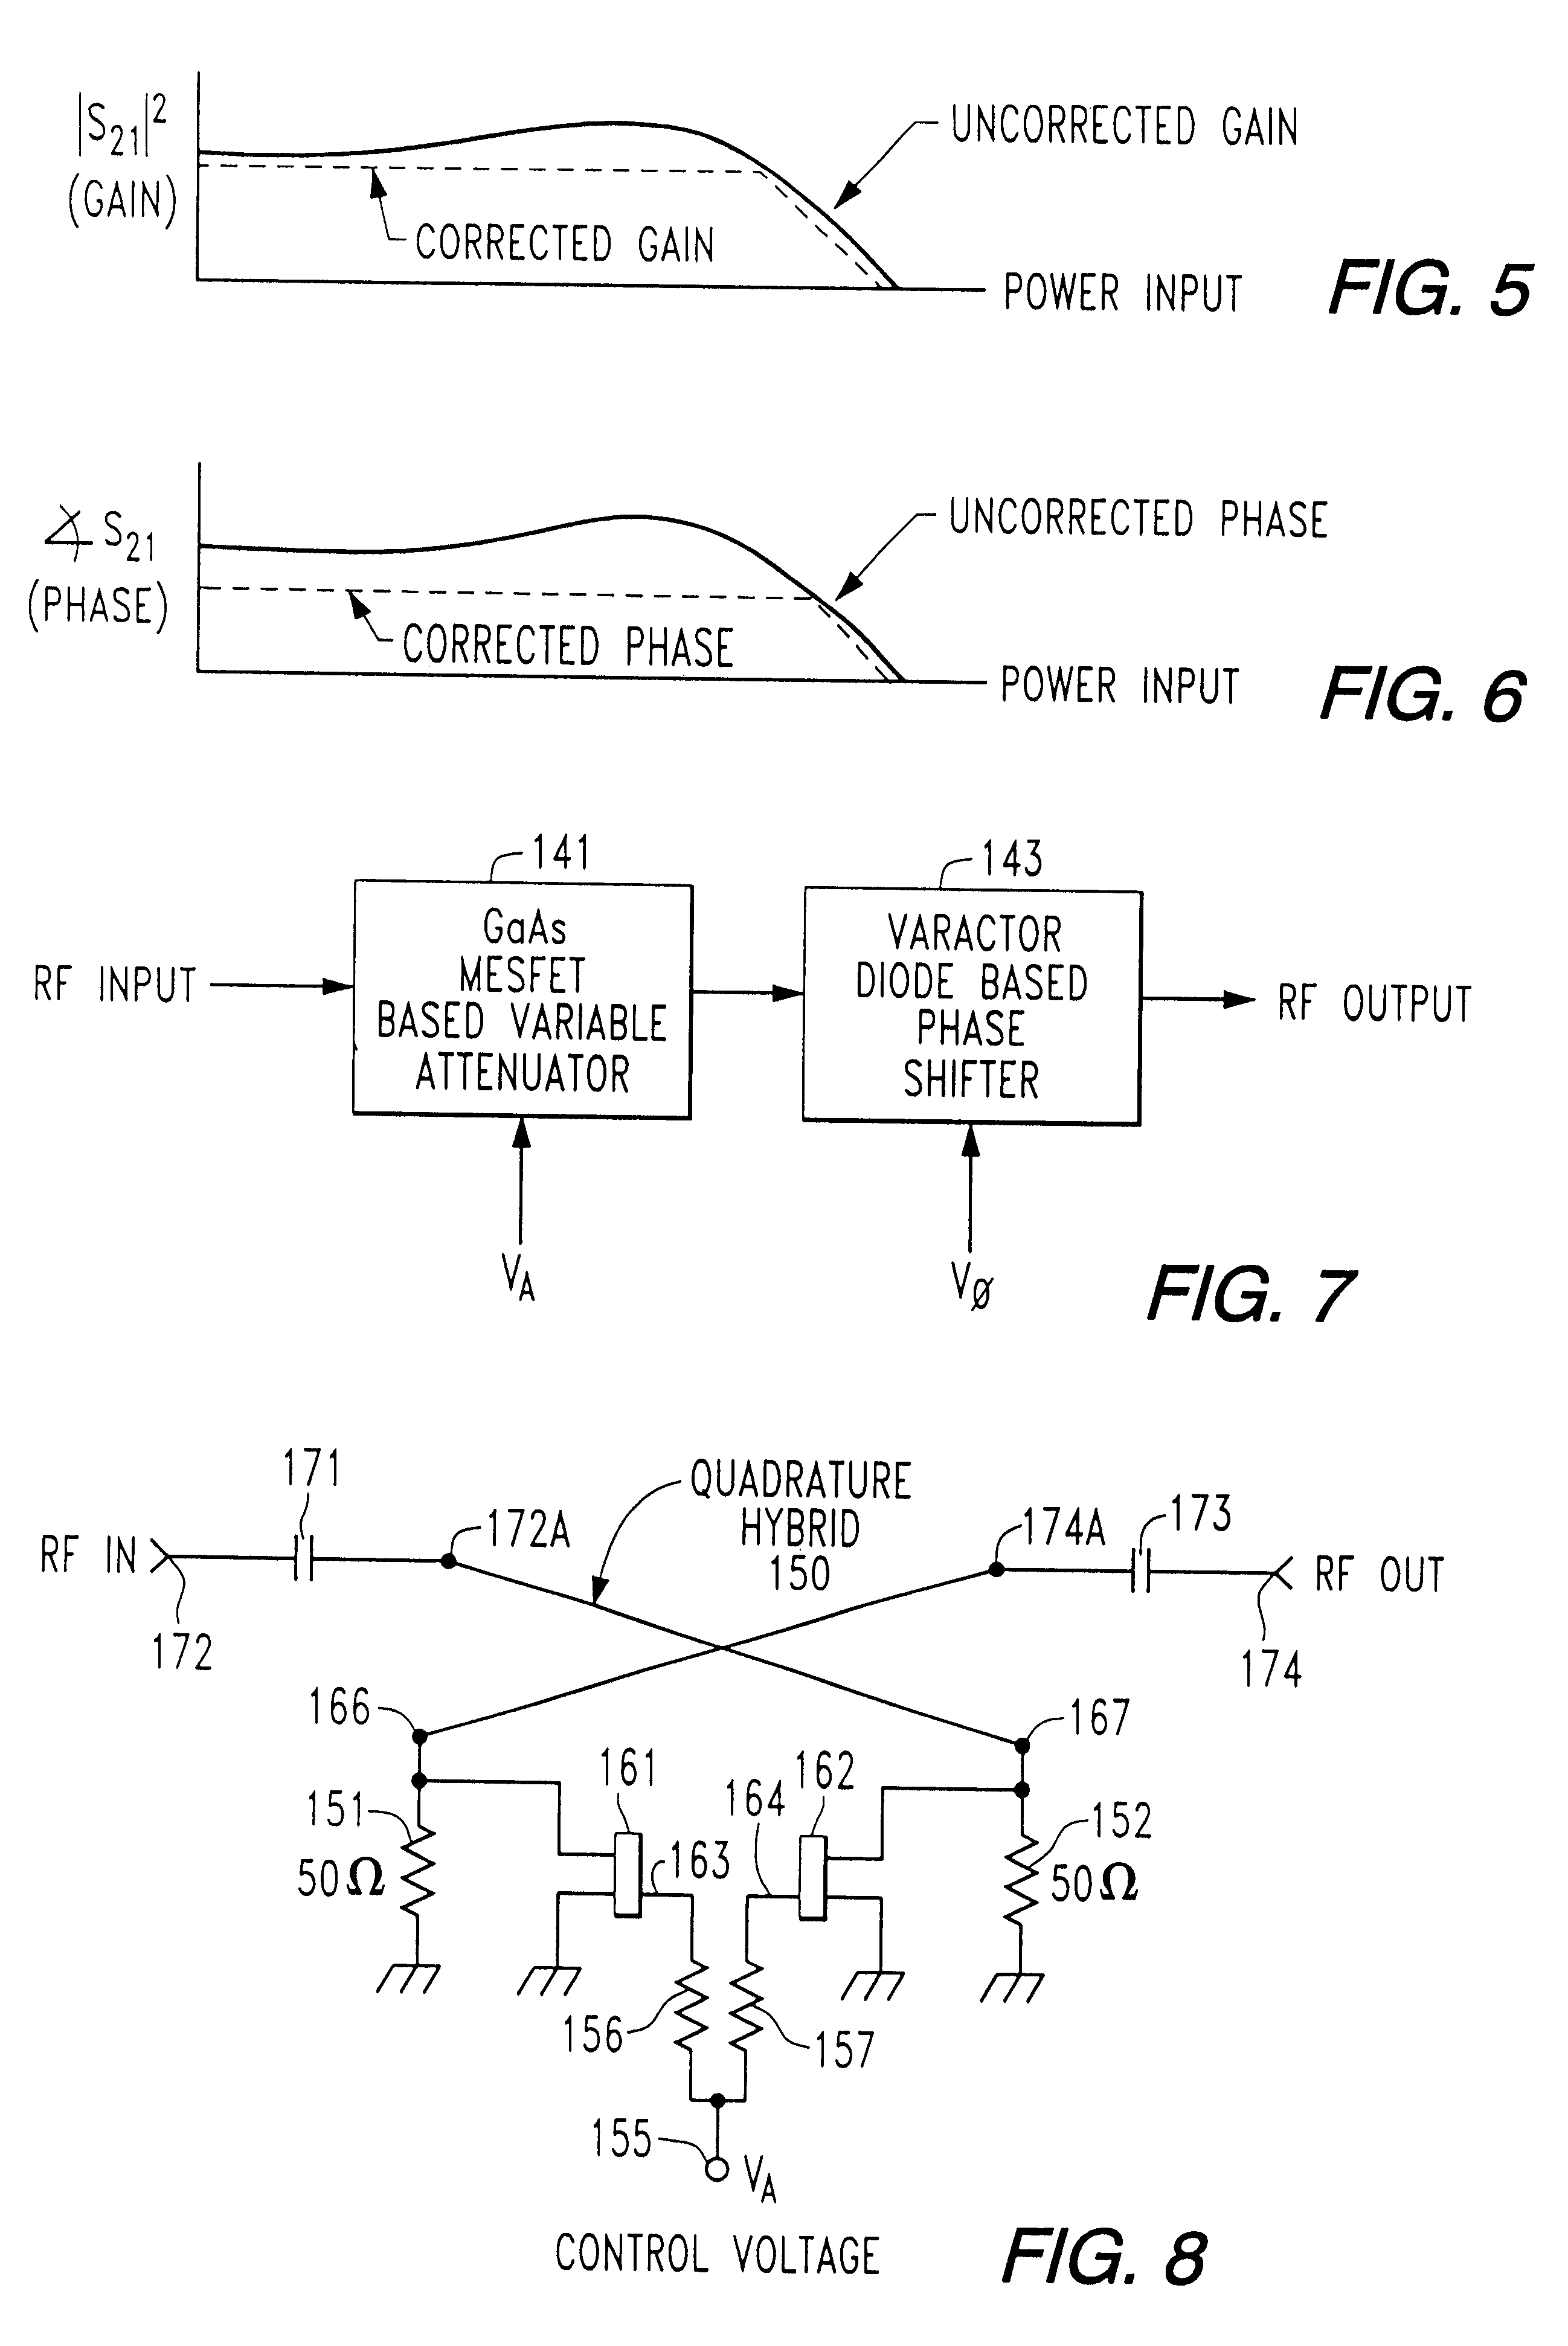 Polar envelope correction mechanism for enhancing linearity of RF/microwave power amplifier